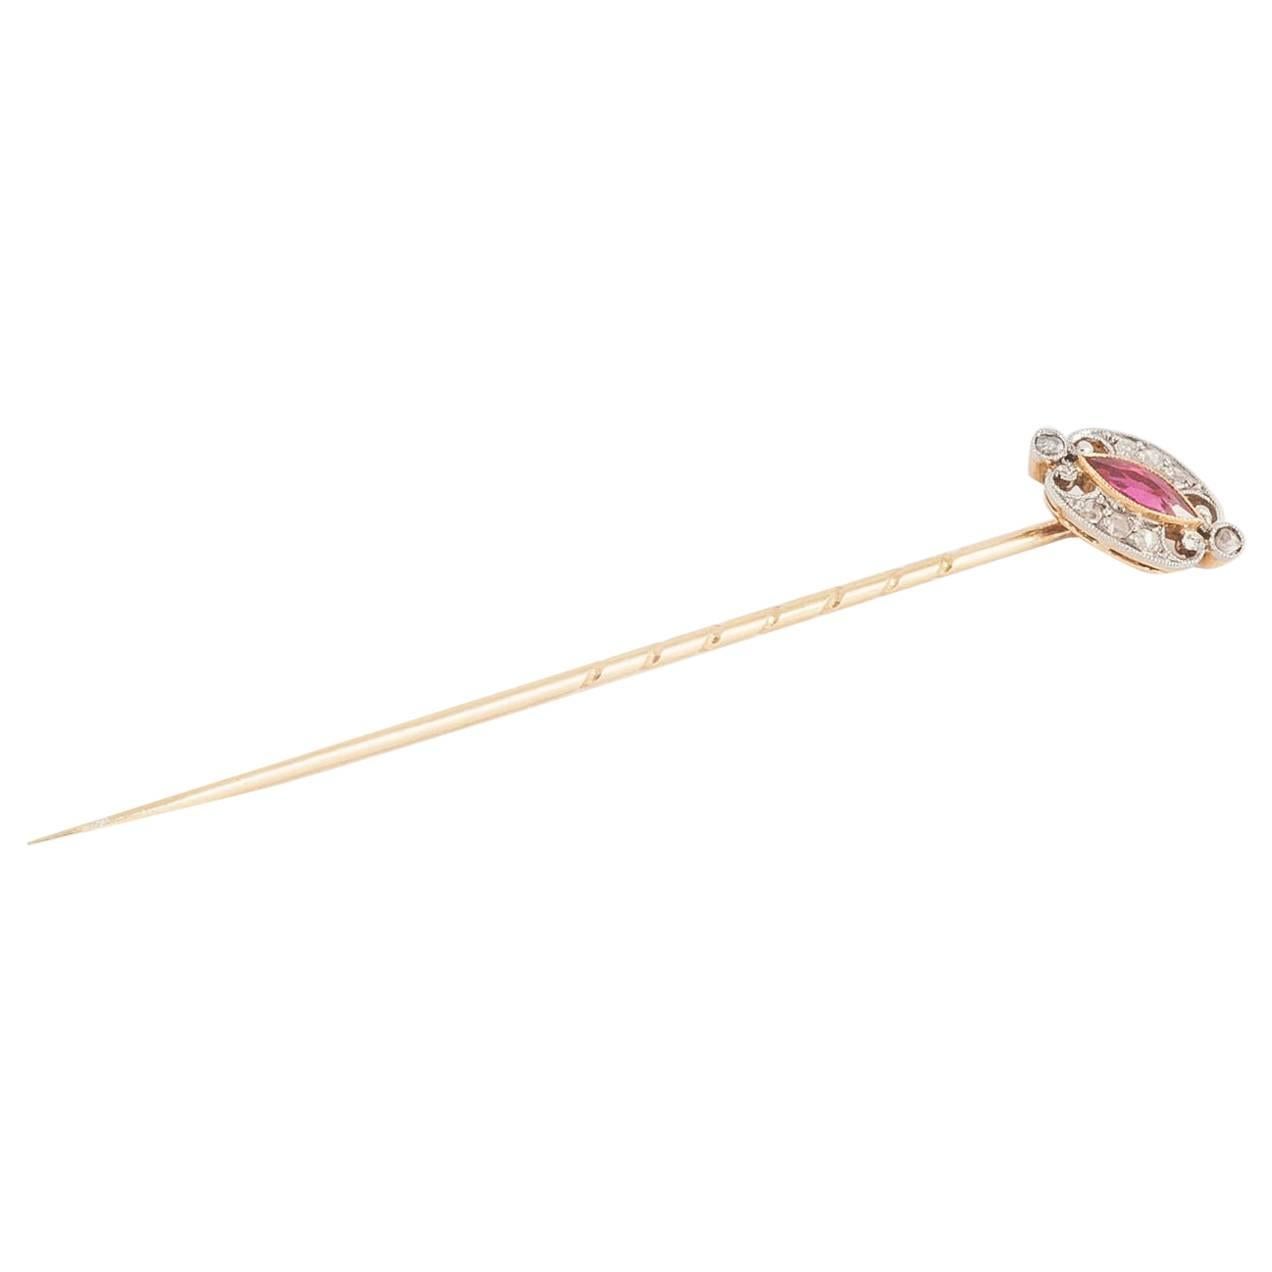 Tie Pin in Gold with Marquise Burma Ruby & Diamond Cluster, English circa 1900 For Sale